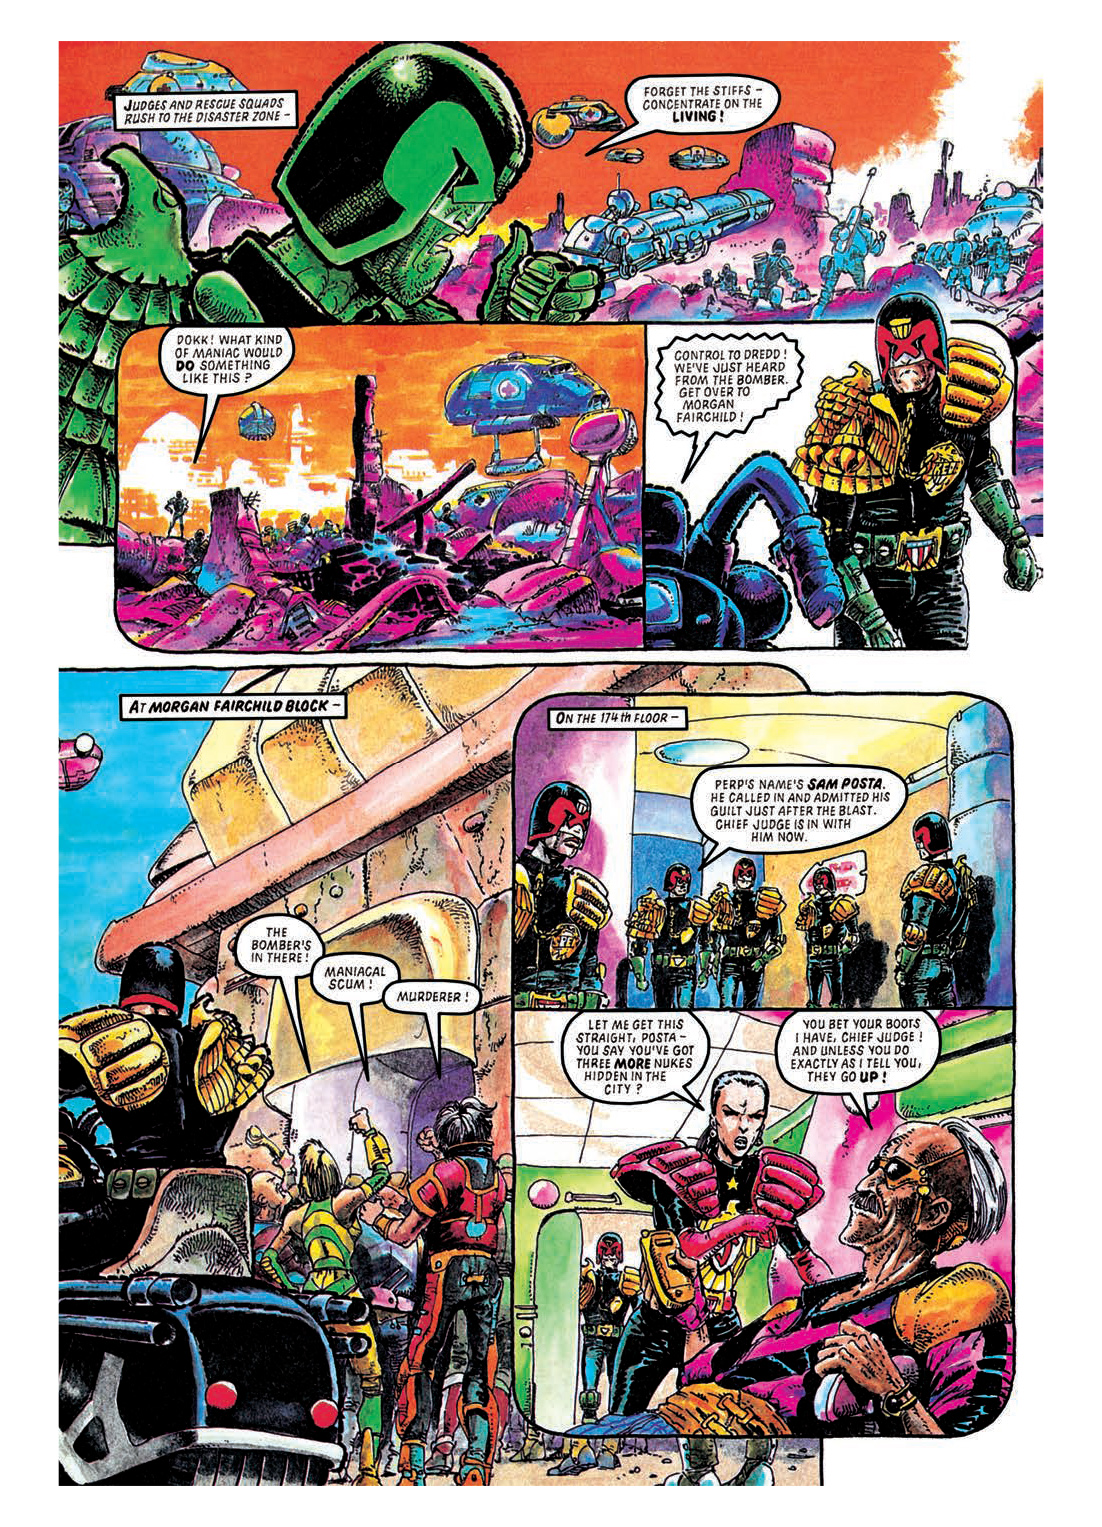 Read online Judge Dredd: The Restricted Files comic -  Issue # TPB 1 - 272